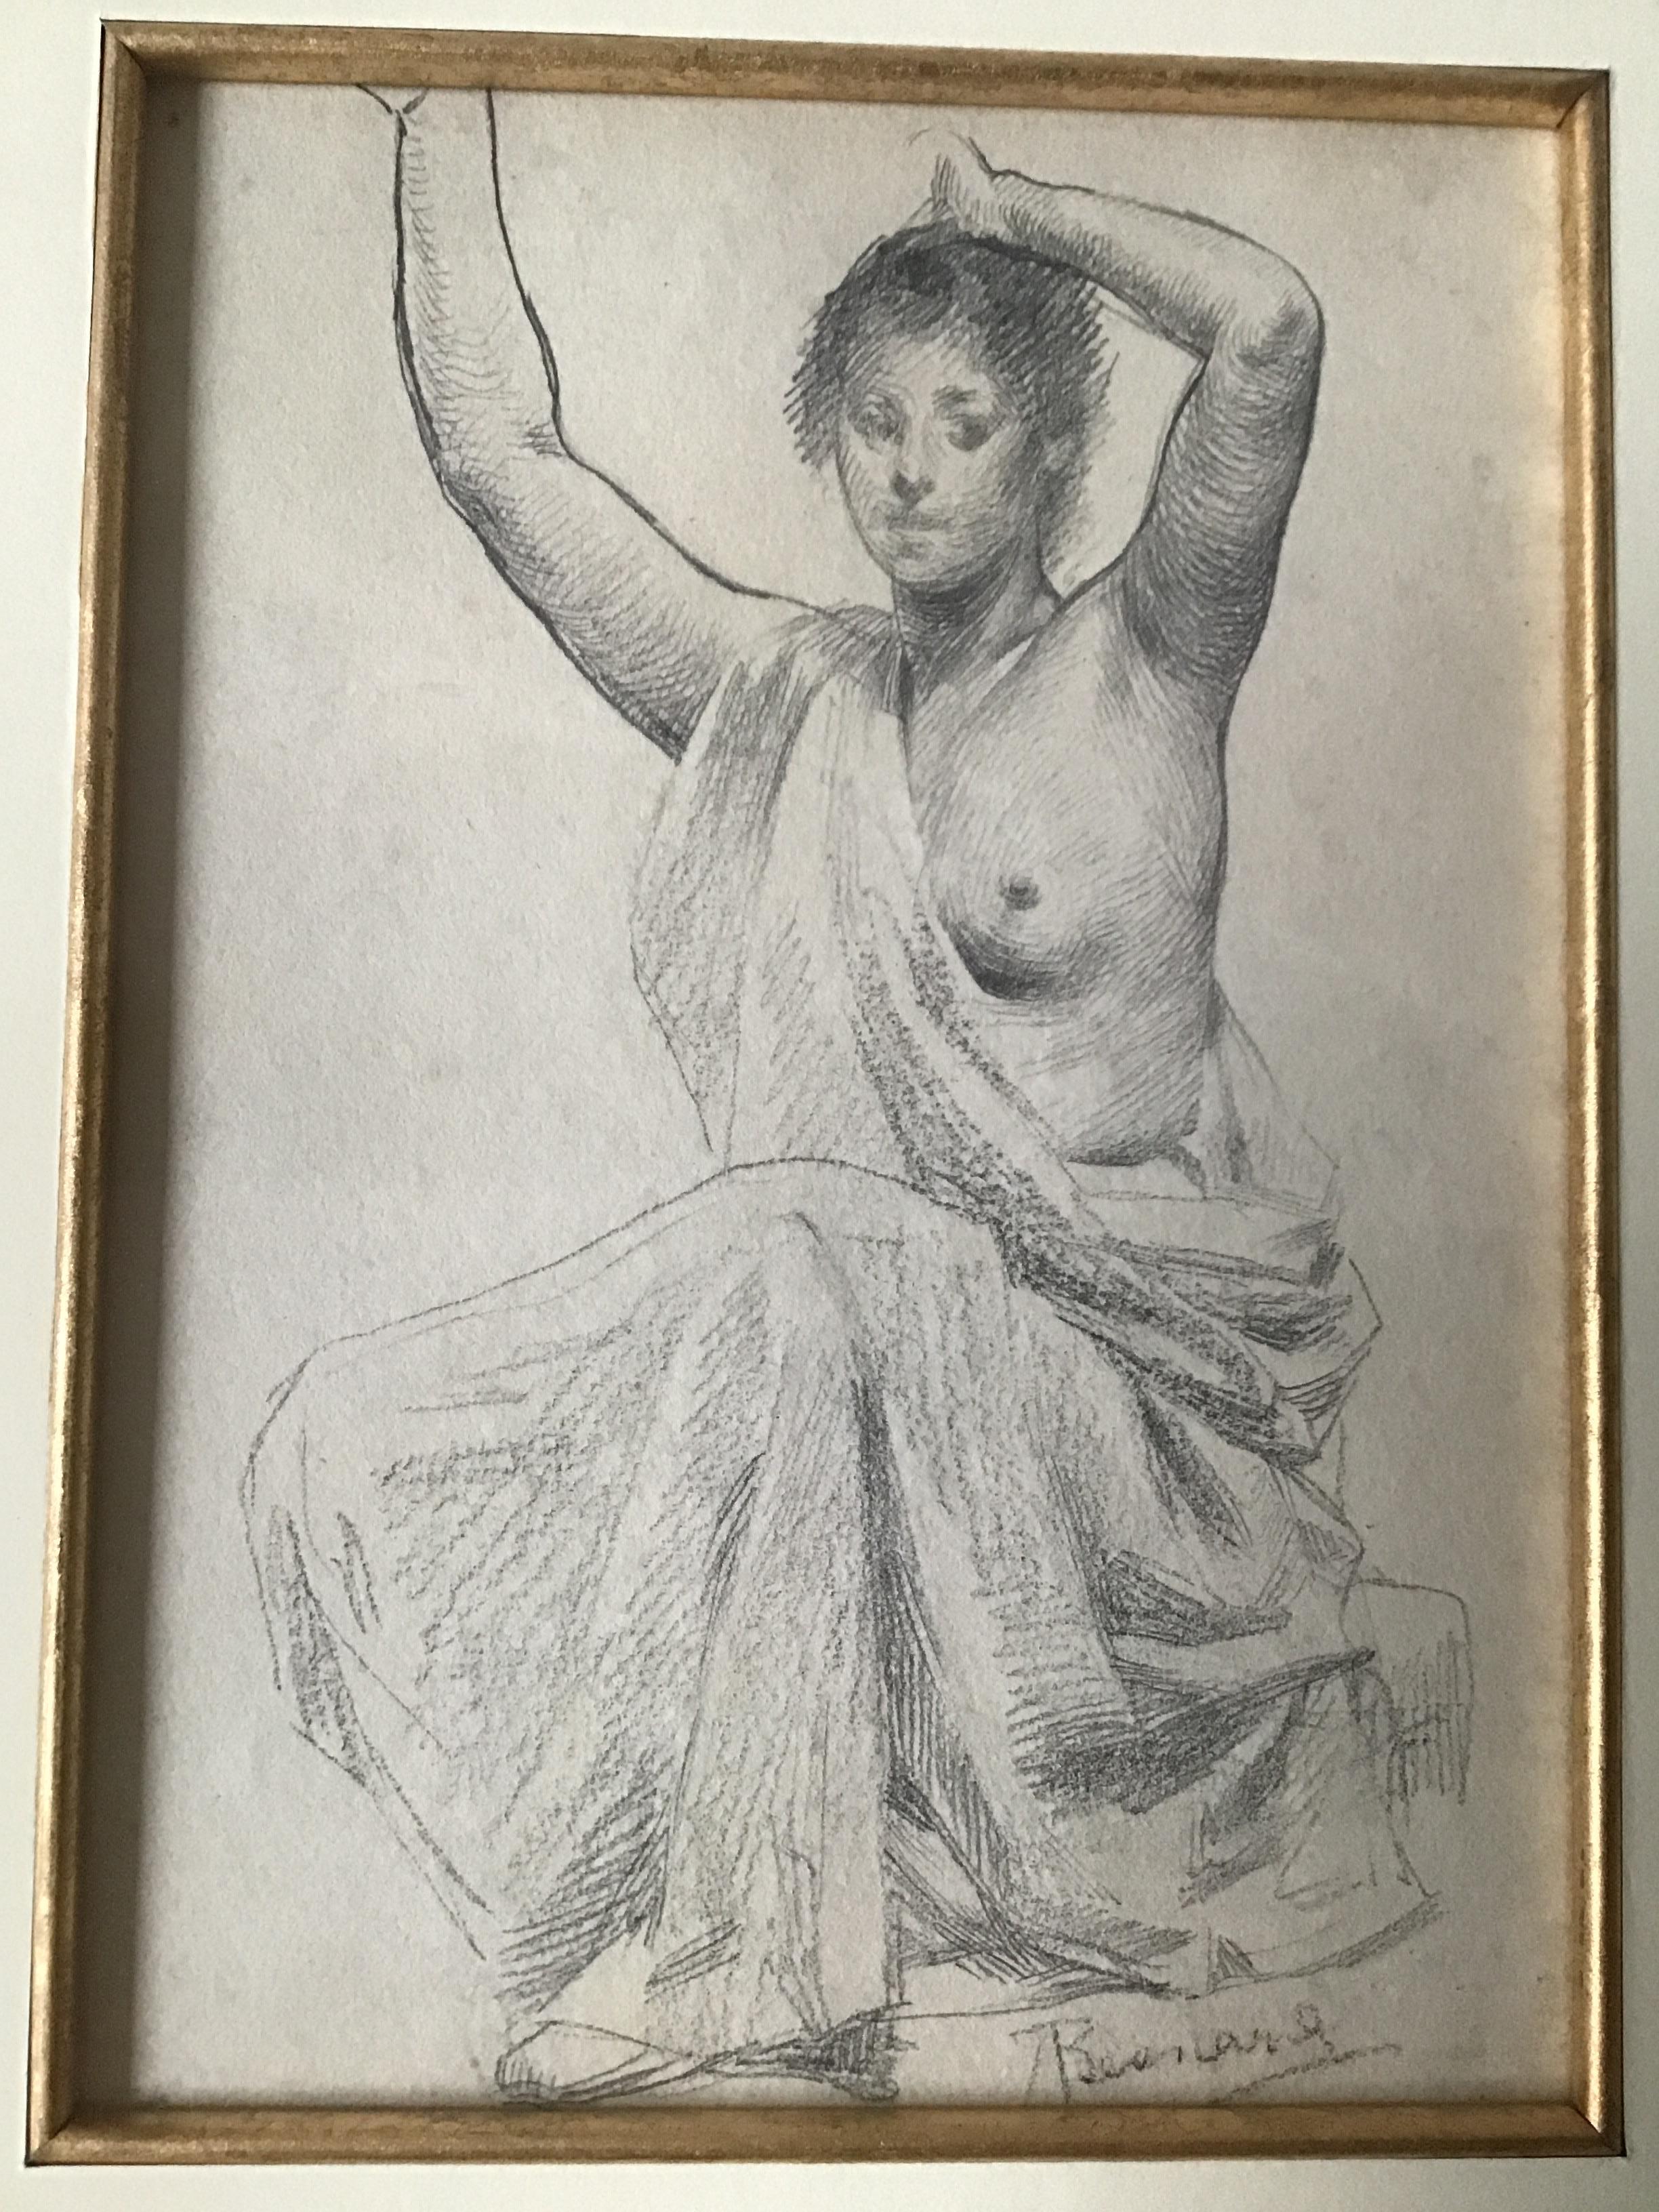 1880s Paul Albert Besnard pencil drawing. From a celebrity’s Southampton, NY oceanfront estate. In a gold gilt frame.